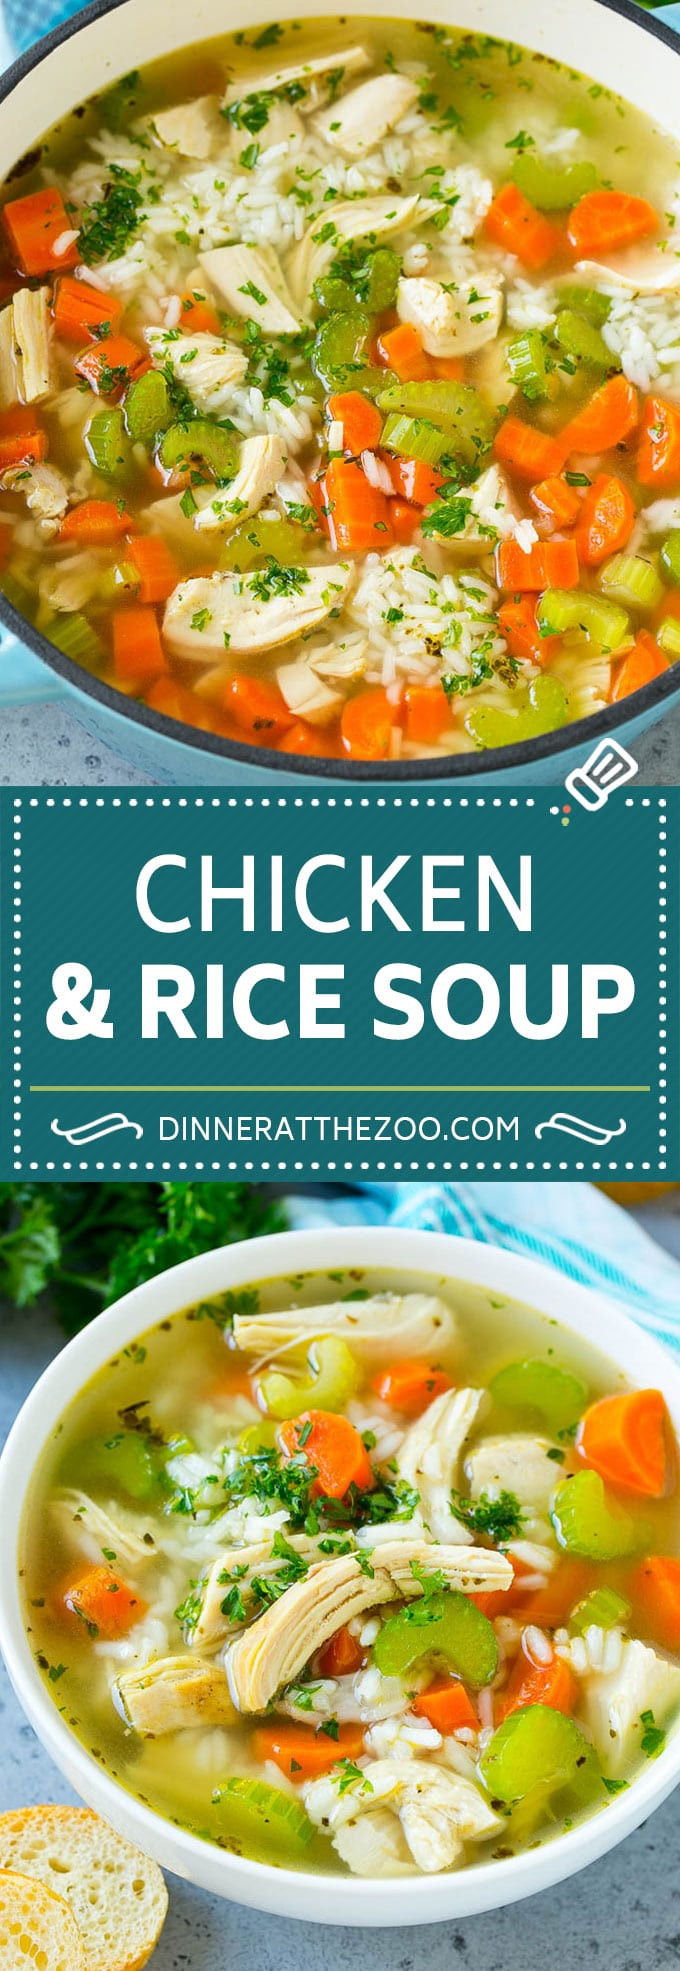 Chicken And Rice Soup Recipe
 Chicken and Rice Soup Dinner at the Zoo